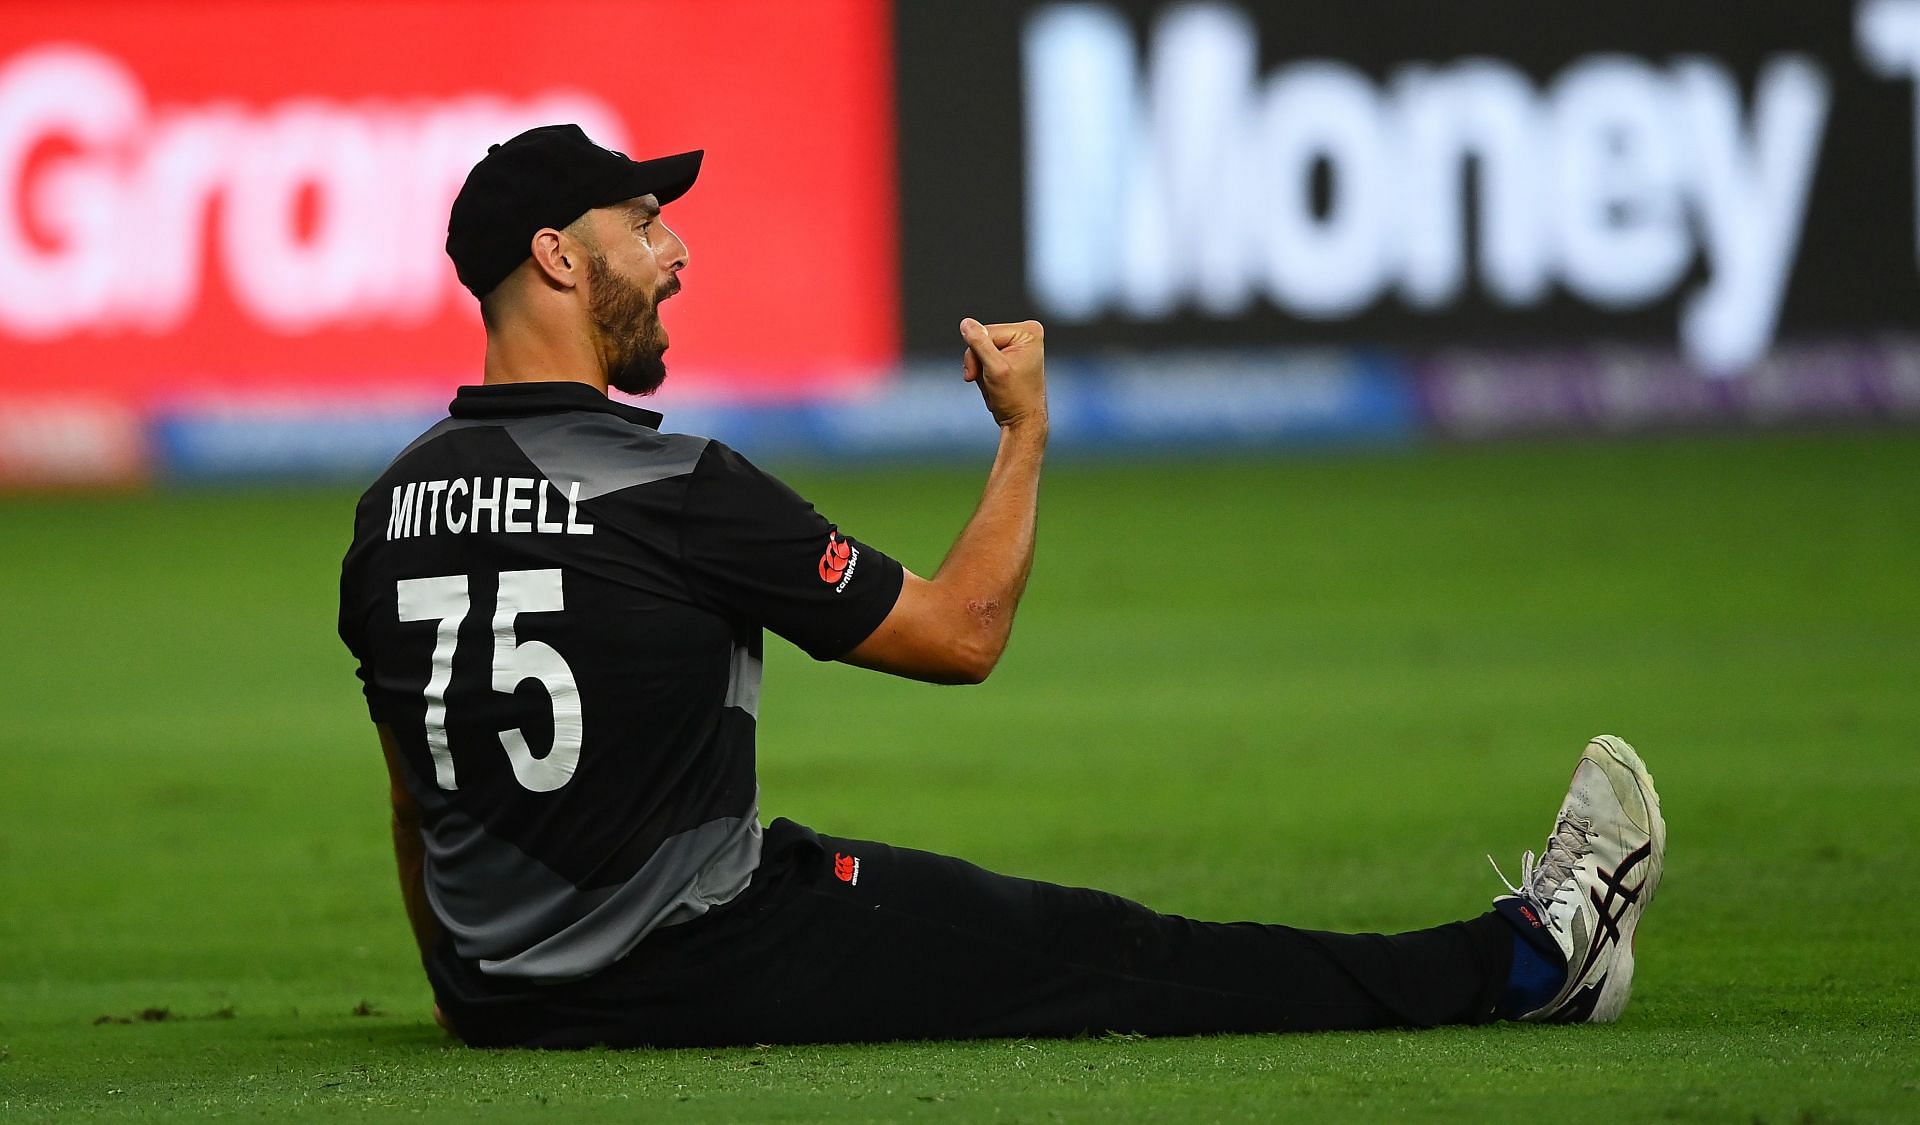 Daryl Mitchell surprised everyone with his batting performance in ICC T20 World Cup 2021